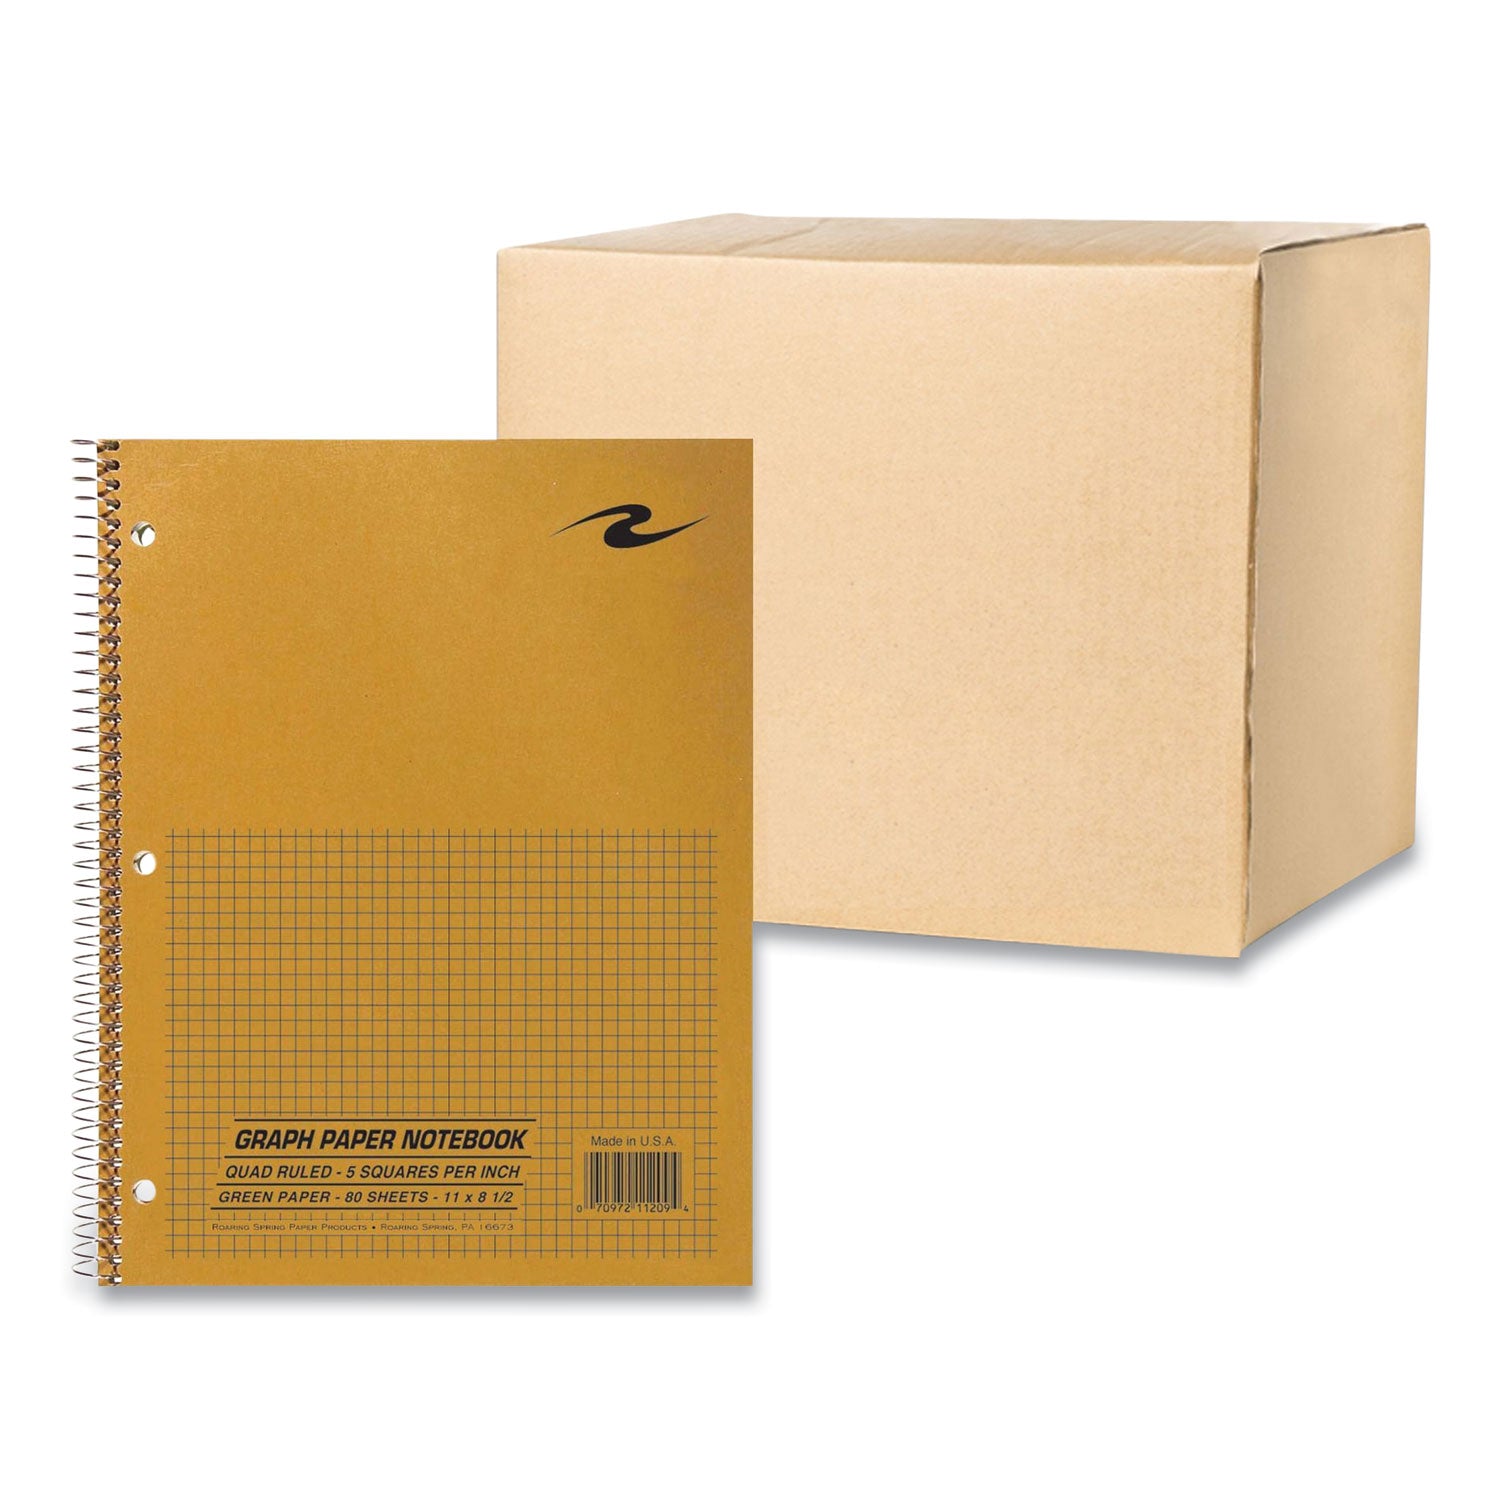 lab-and-science-wirebound-notebook-quadrille-rule-5-sq-in-brown-cover-80-85-x-11-sheets-24-ct-ships-in-4-6-bus-days_roa11209cs - 1